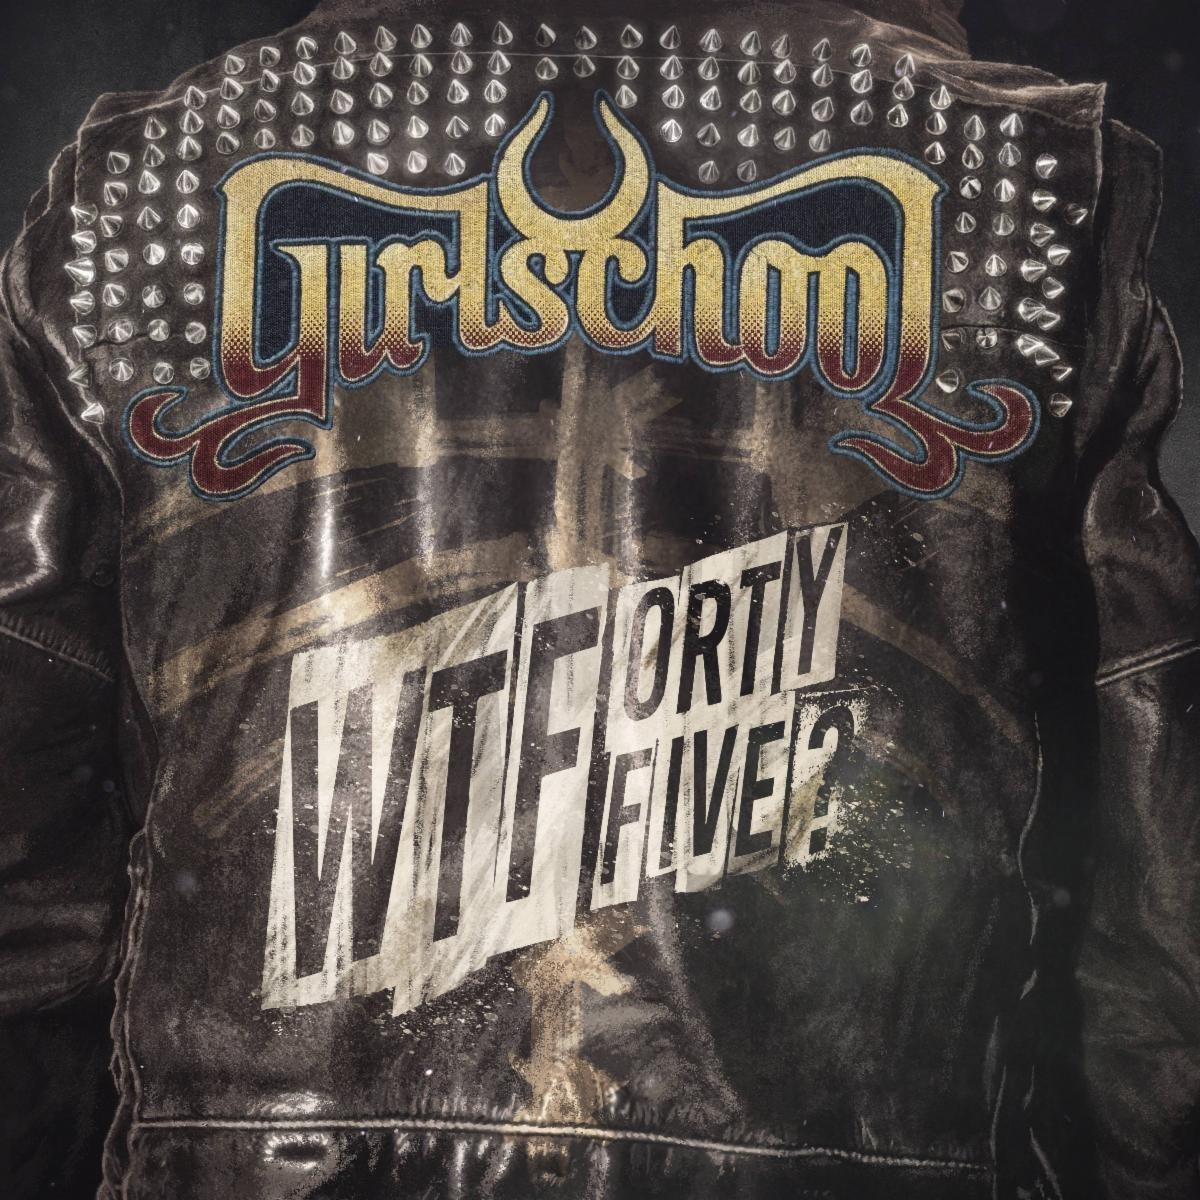 Watch The Video For “Cold Dark Heart” By Girlschool